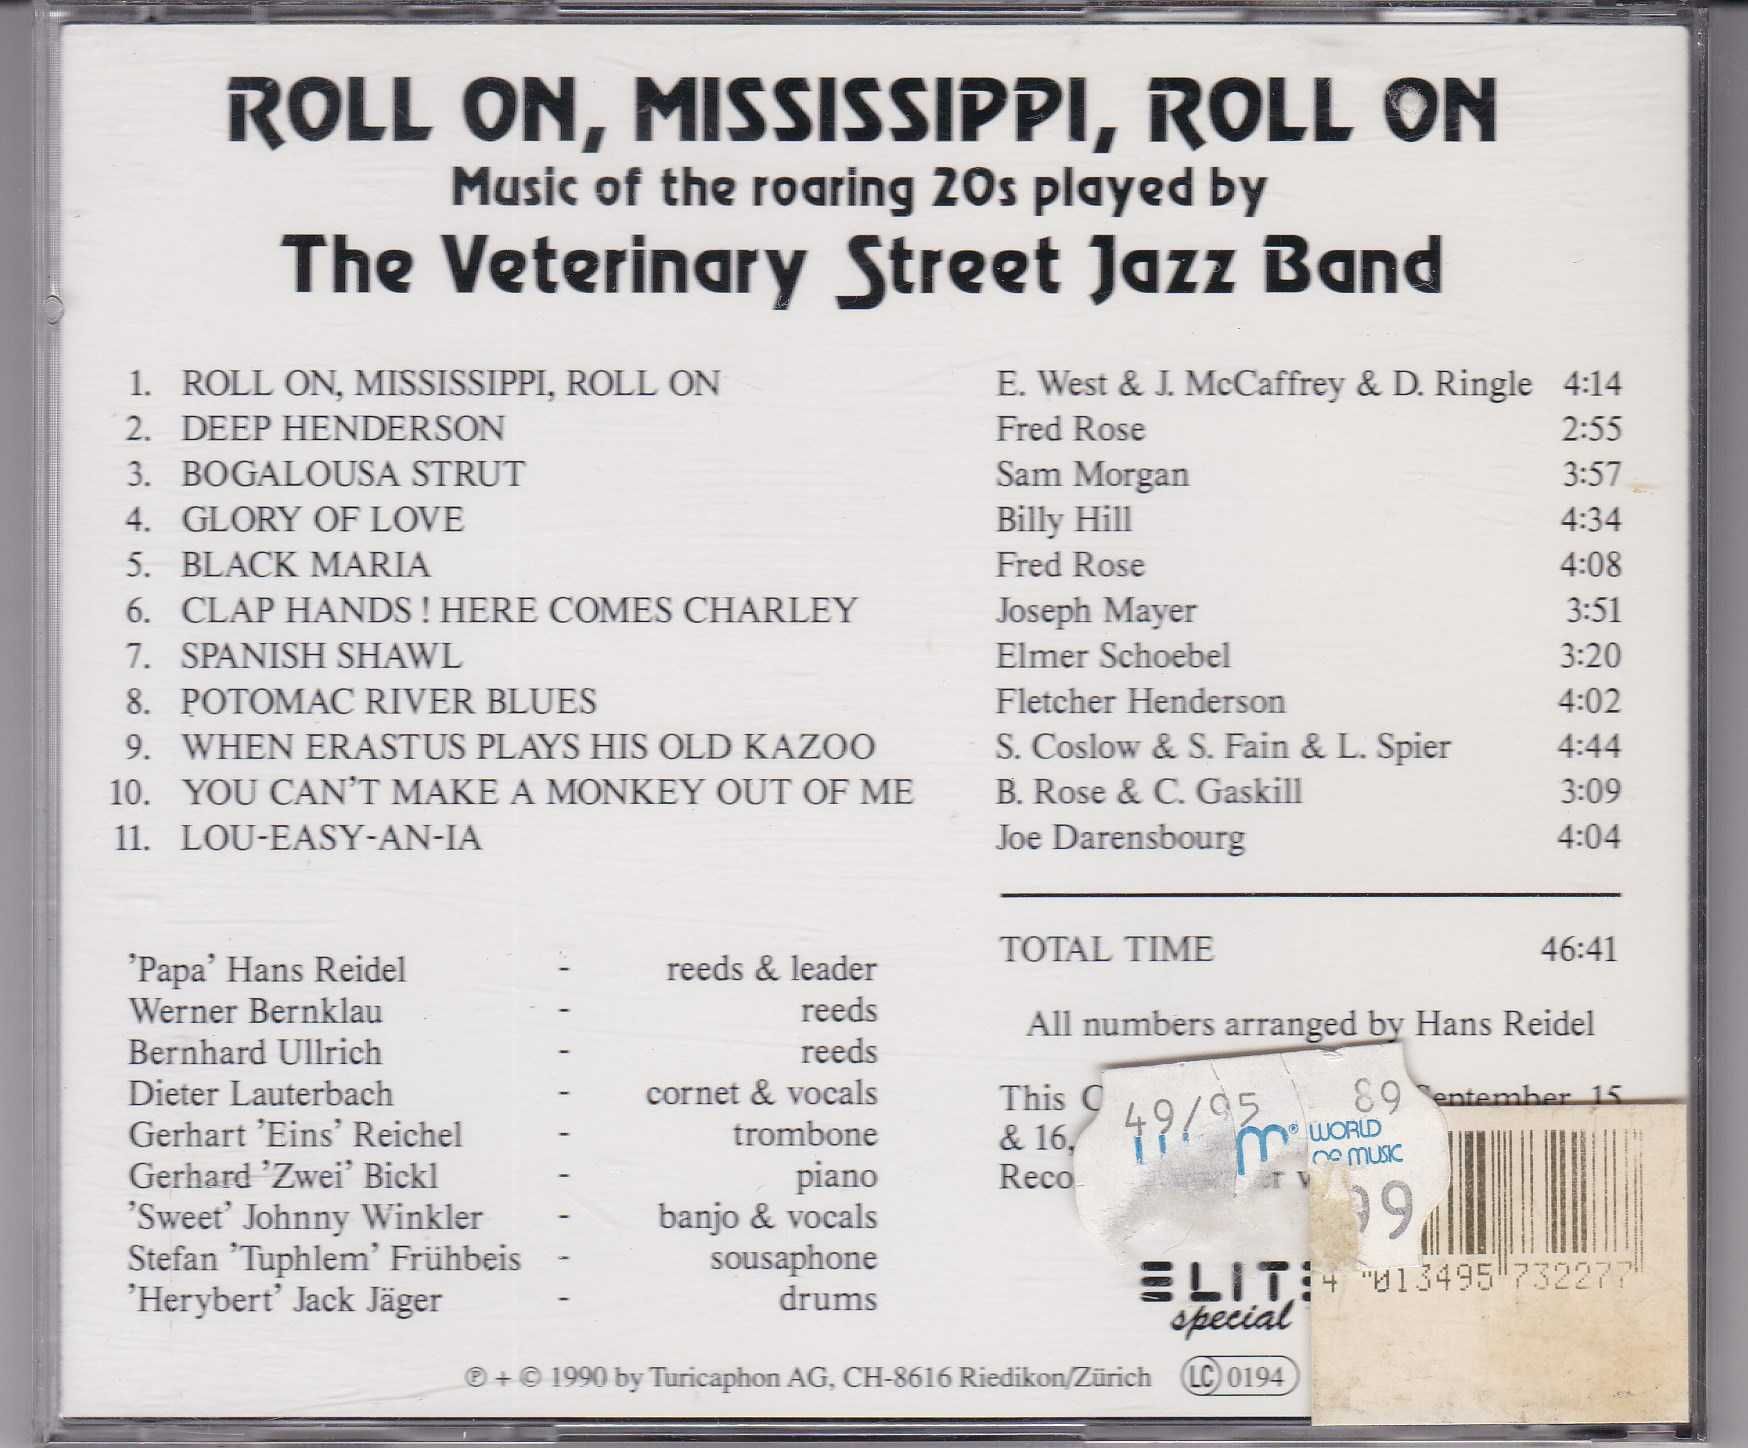 Roll on Mississippi rol - The Veterinary Street